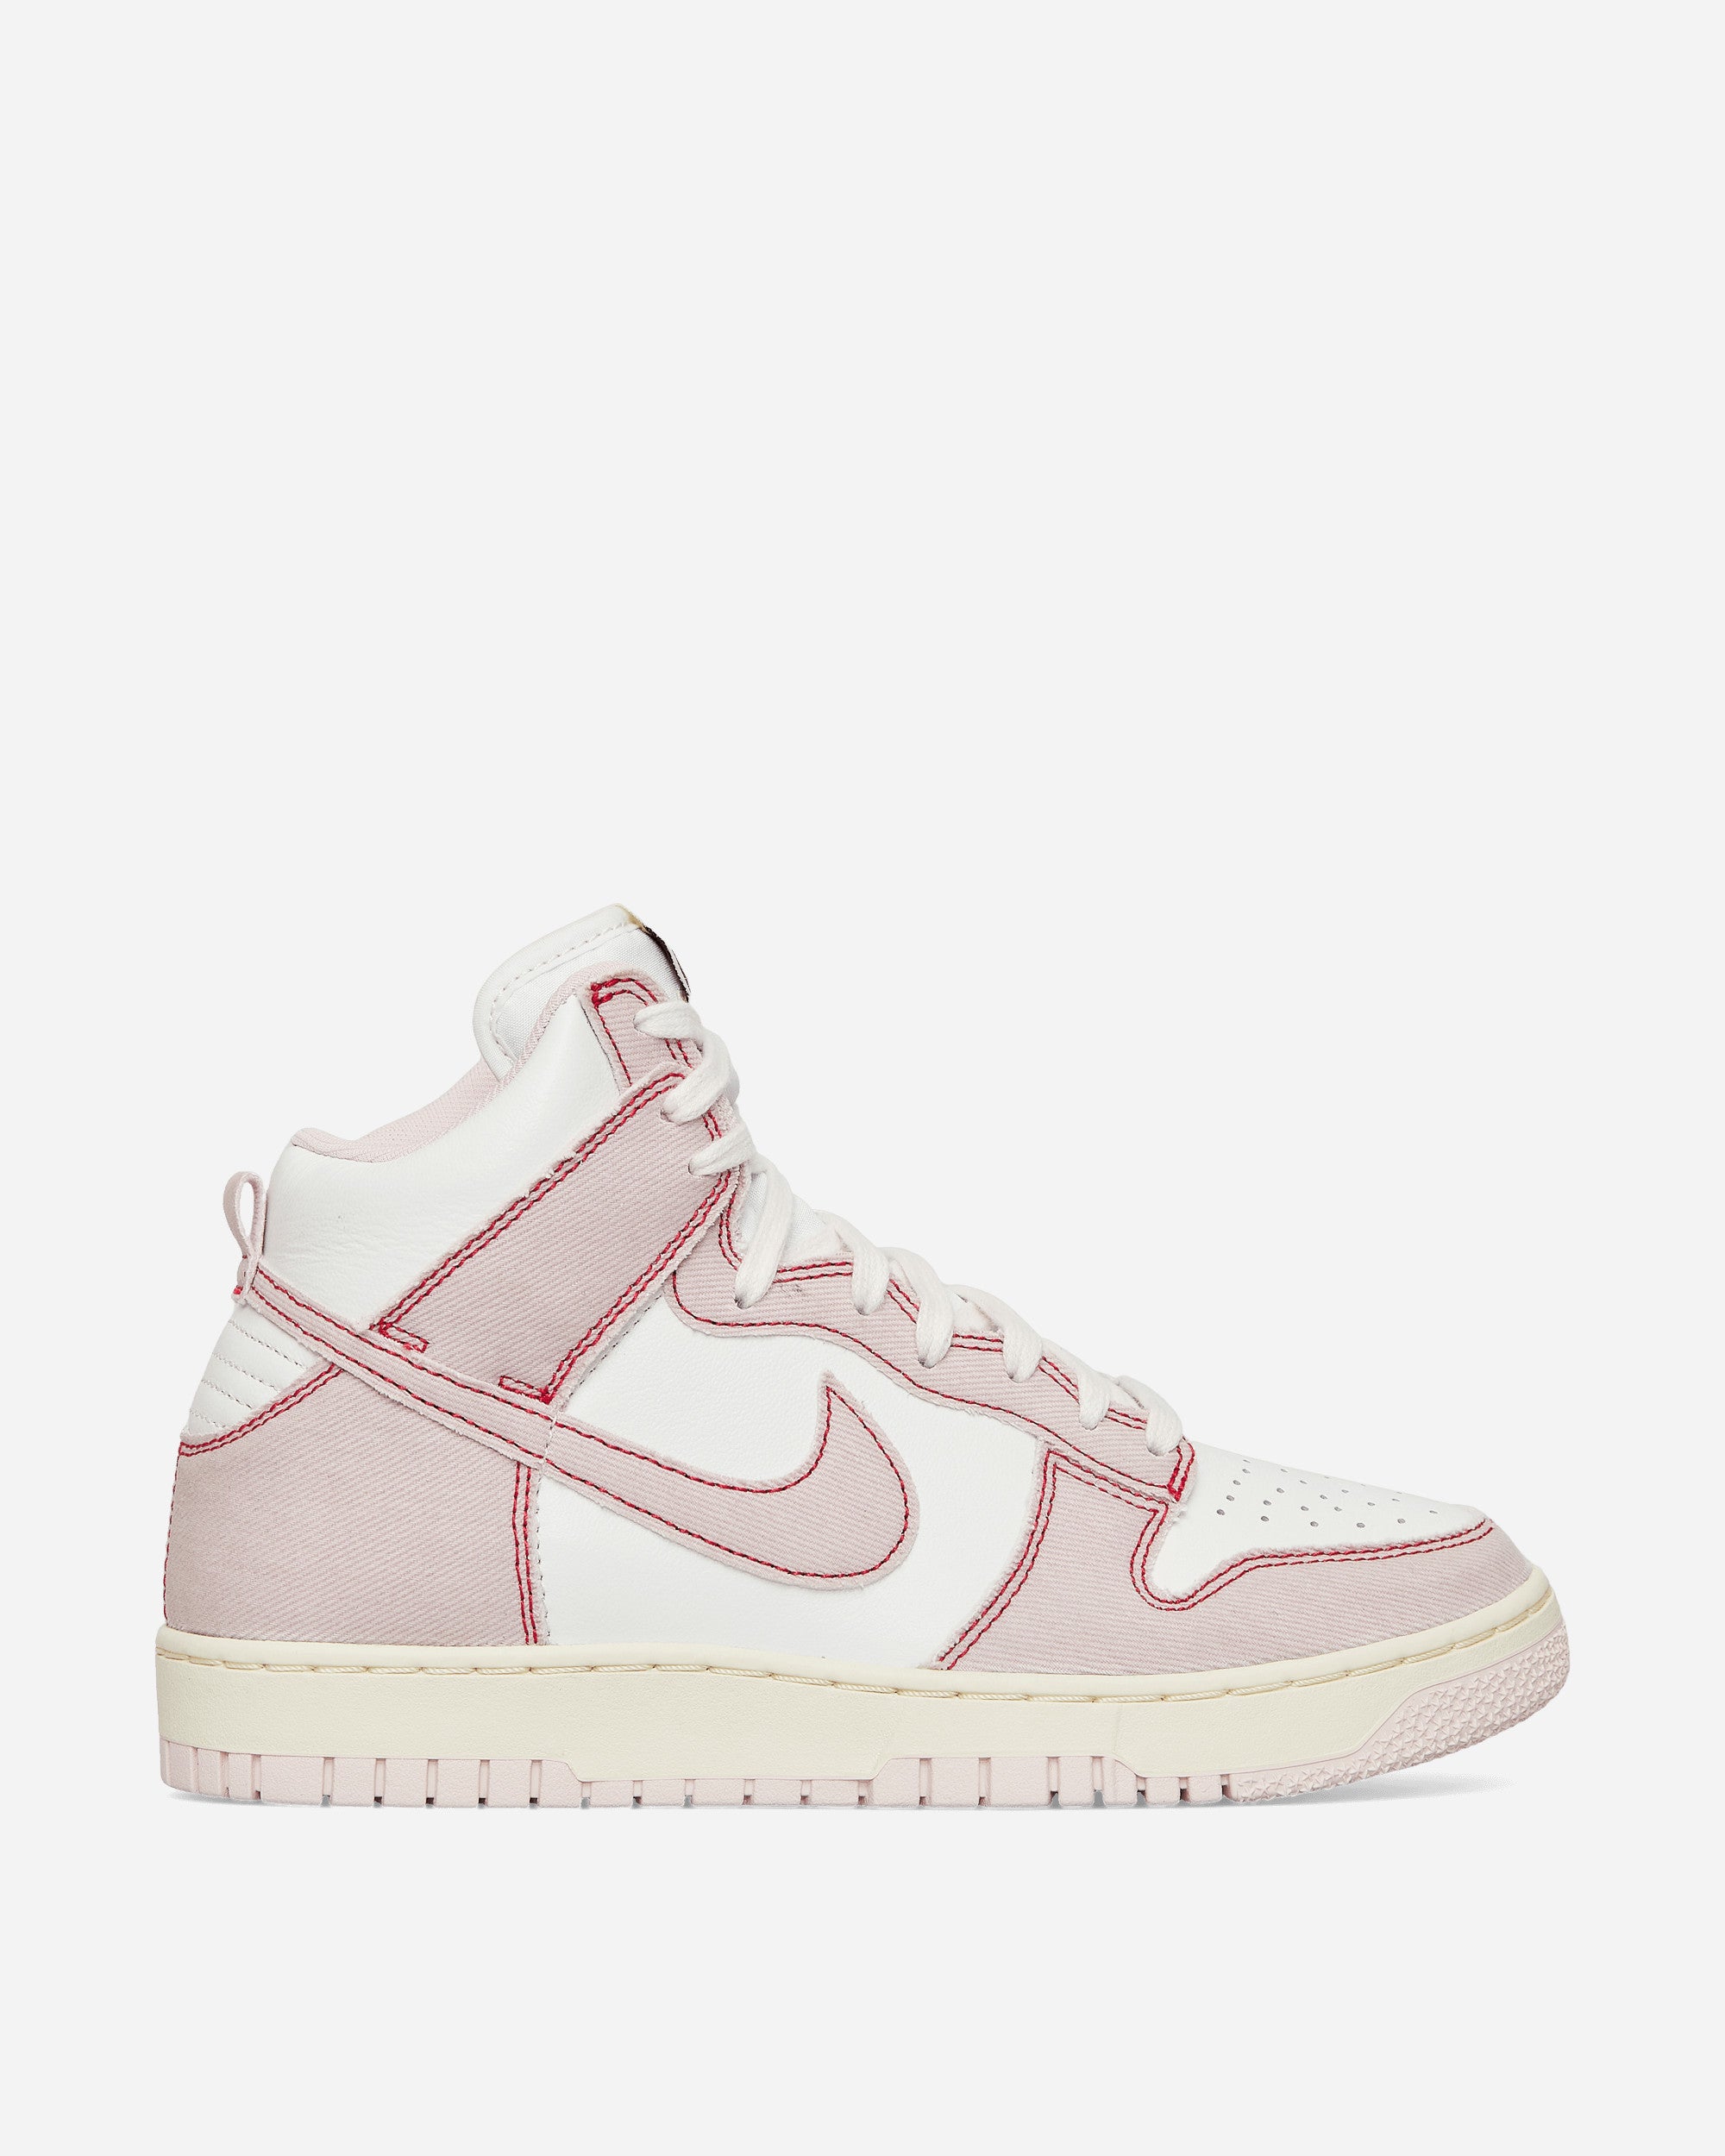 Nike Dunk Hi 1985 Summit White/Barely Rose Sneakers High DQ8799-100